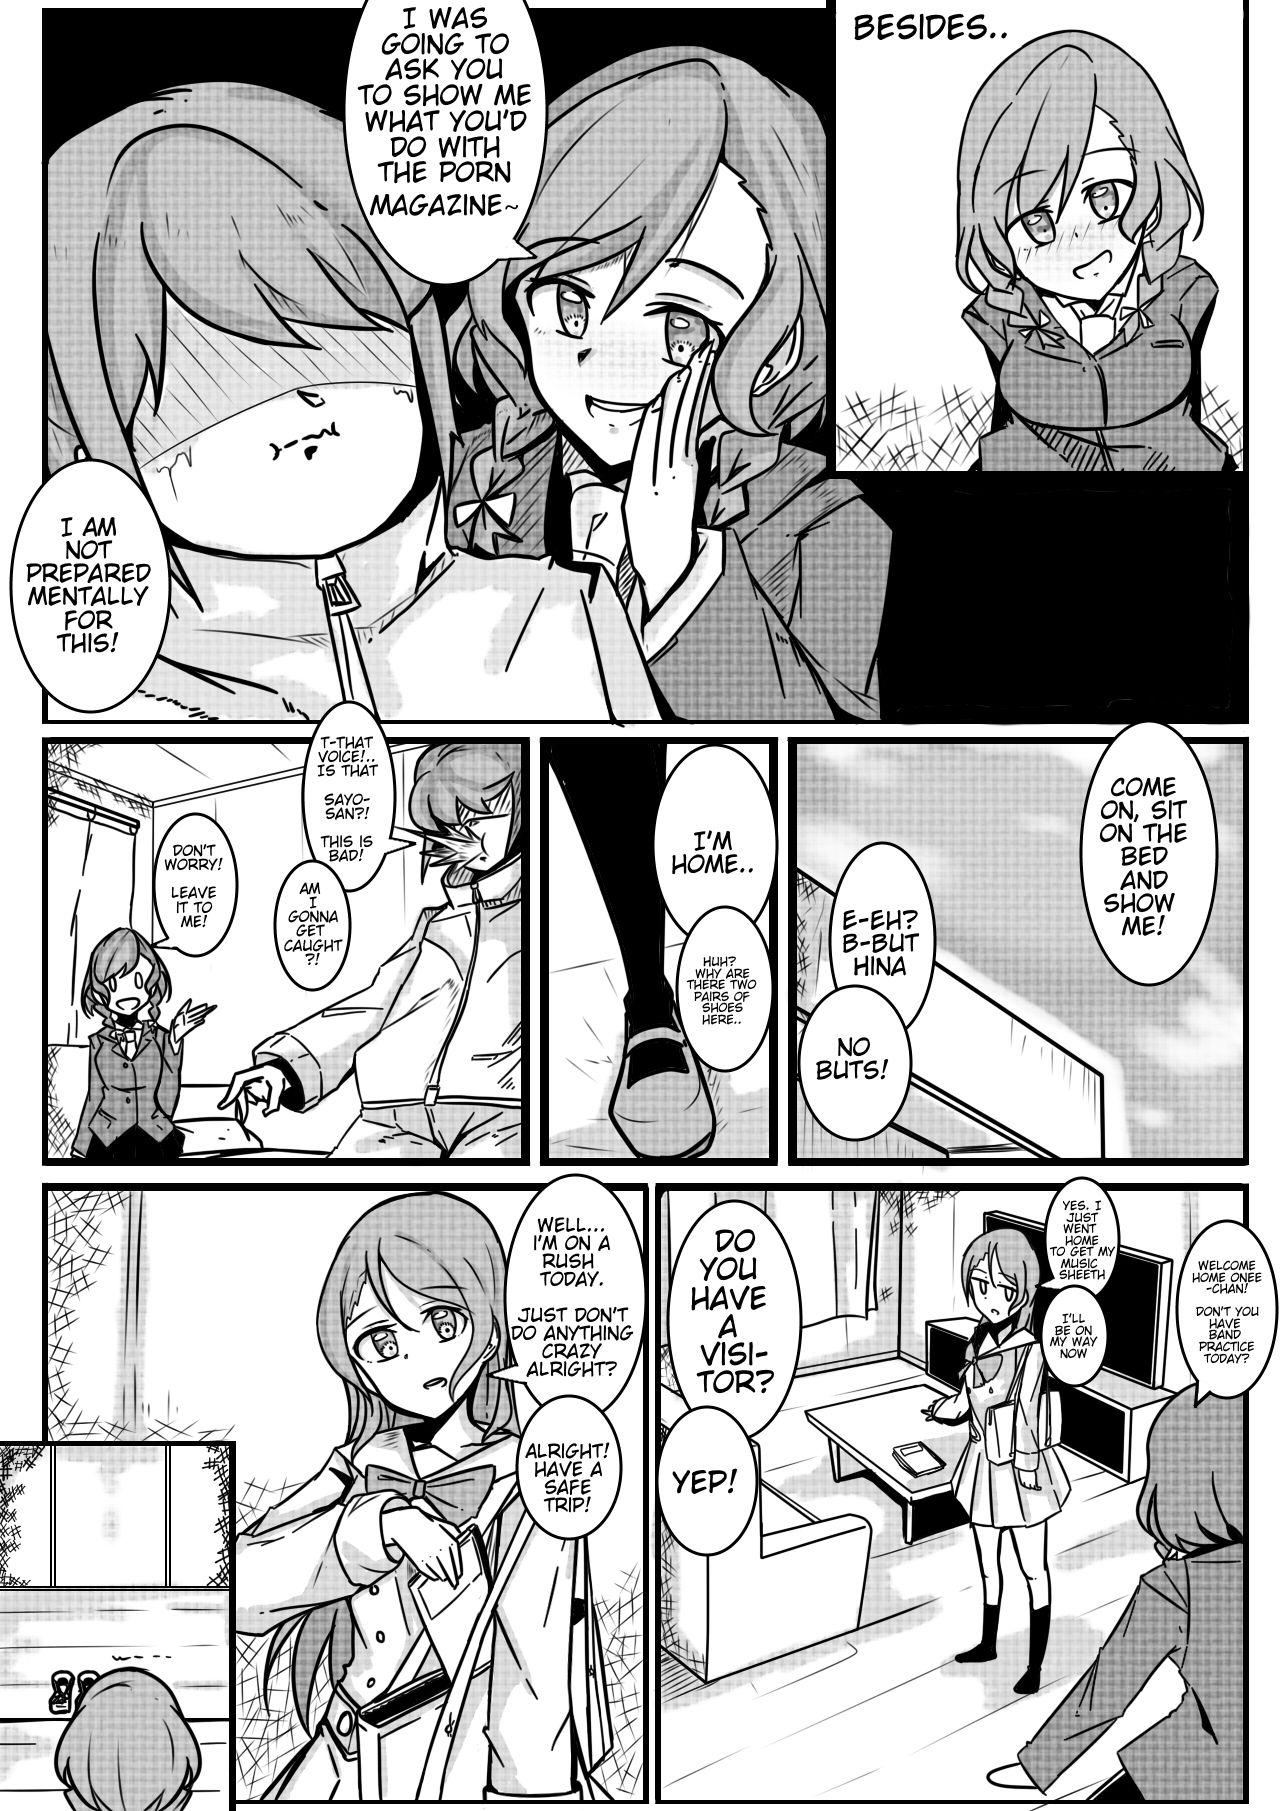 Culonas Minty Surprise - Bang dream Japanese - Page 8